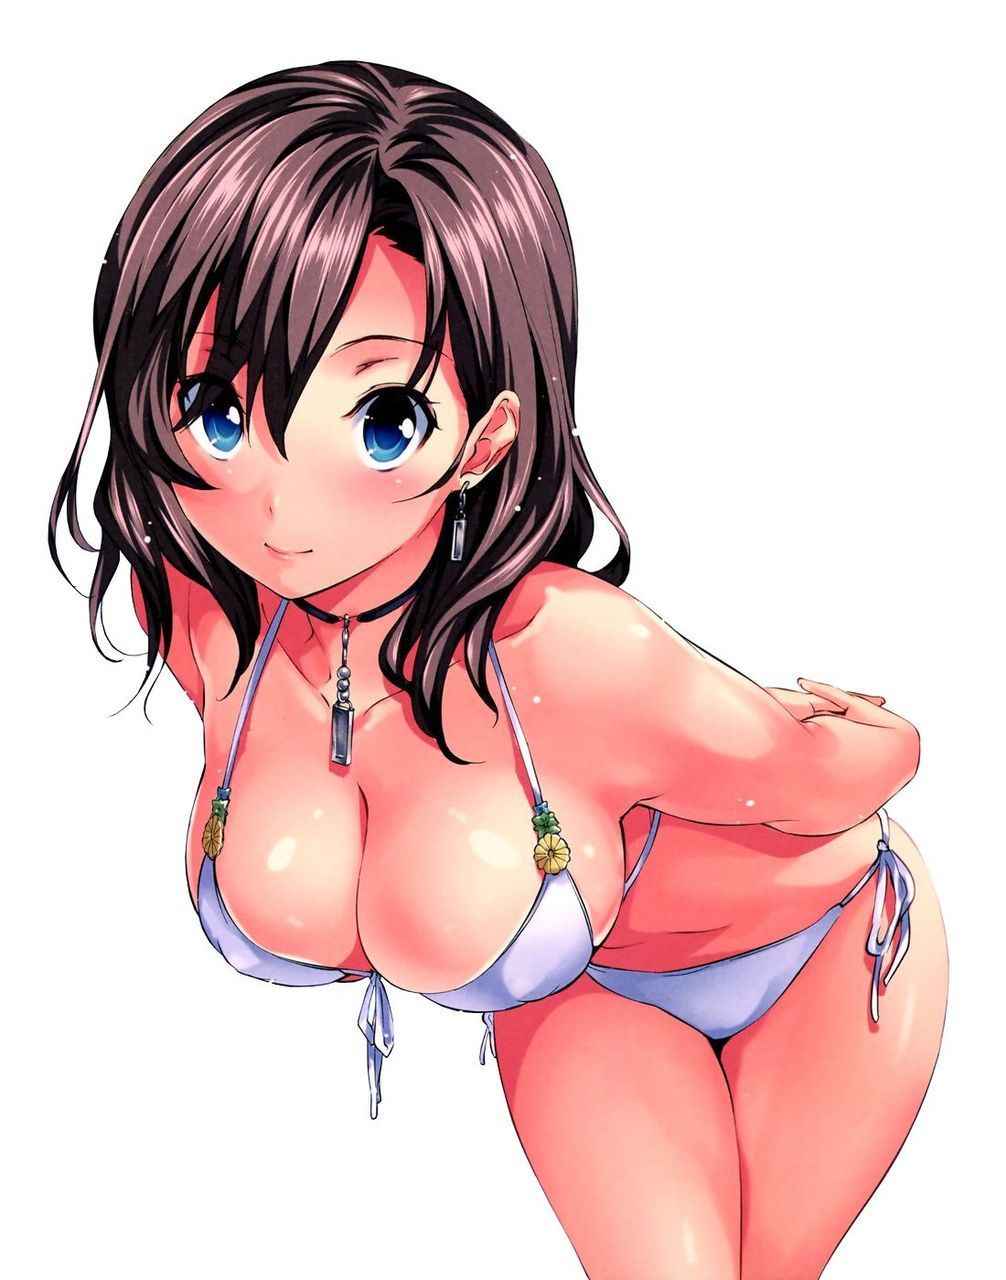 Swimsuit girl cloth area too small! I will take pictures 13